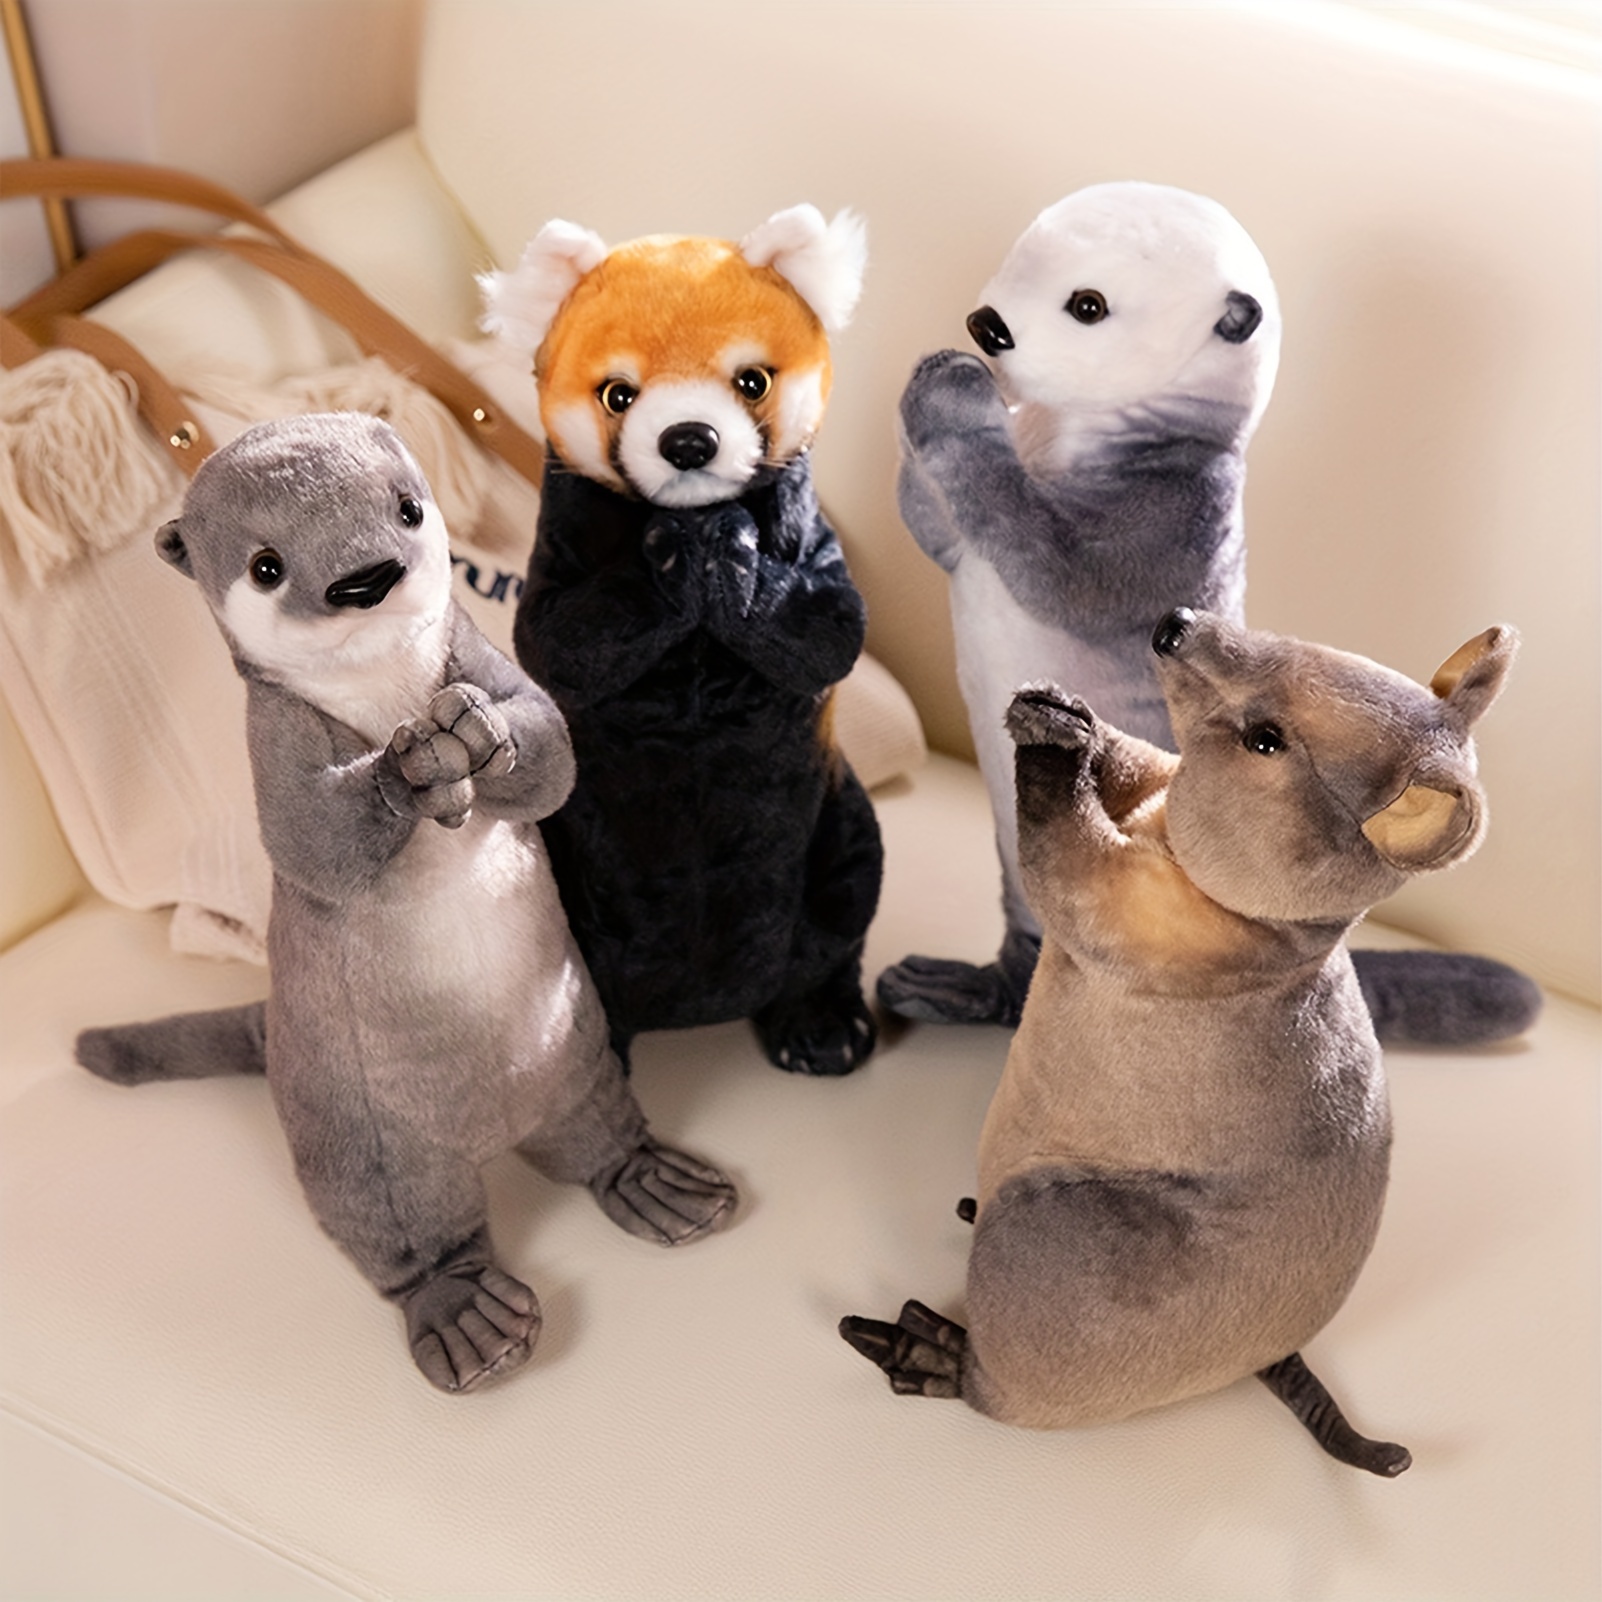 

35cm/13.78in Animals To Thank For Blessing Plush Toys Red Panda Otter Short-tailed Kangaroo Sea Otter Plush Toys Timeless Companions Animals Plush Lifelike Detail-huggable Plush Home Decor Party Gifts